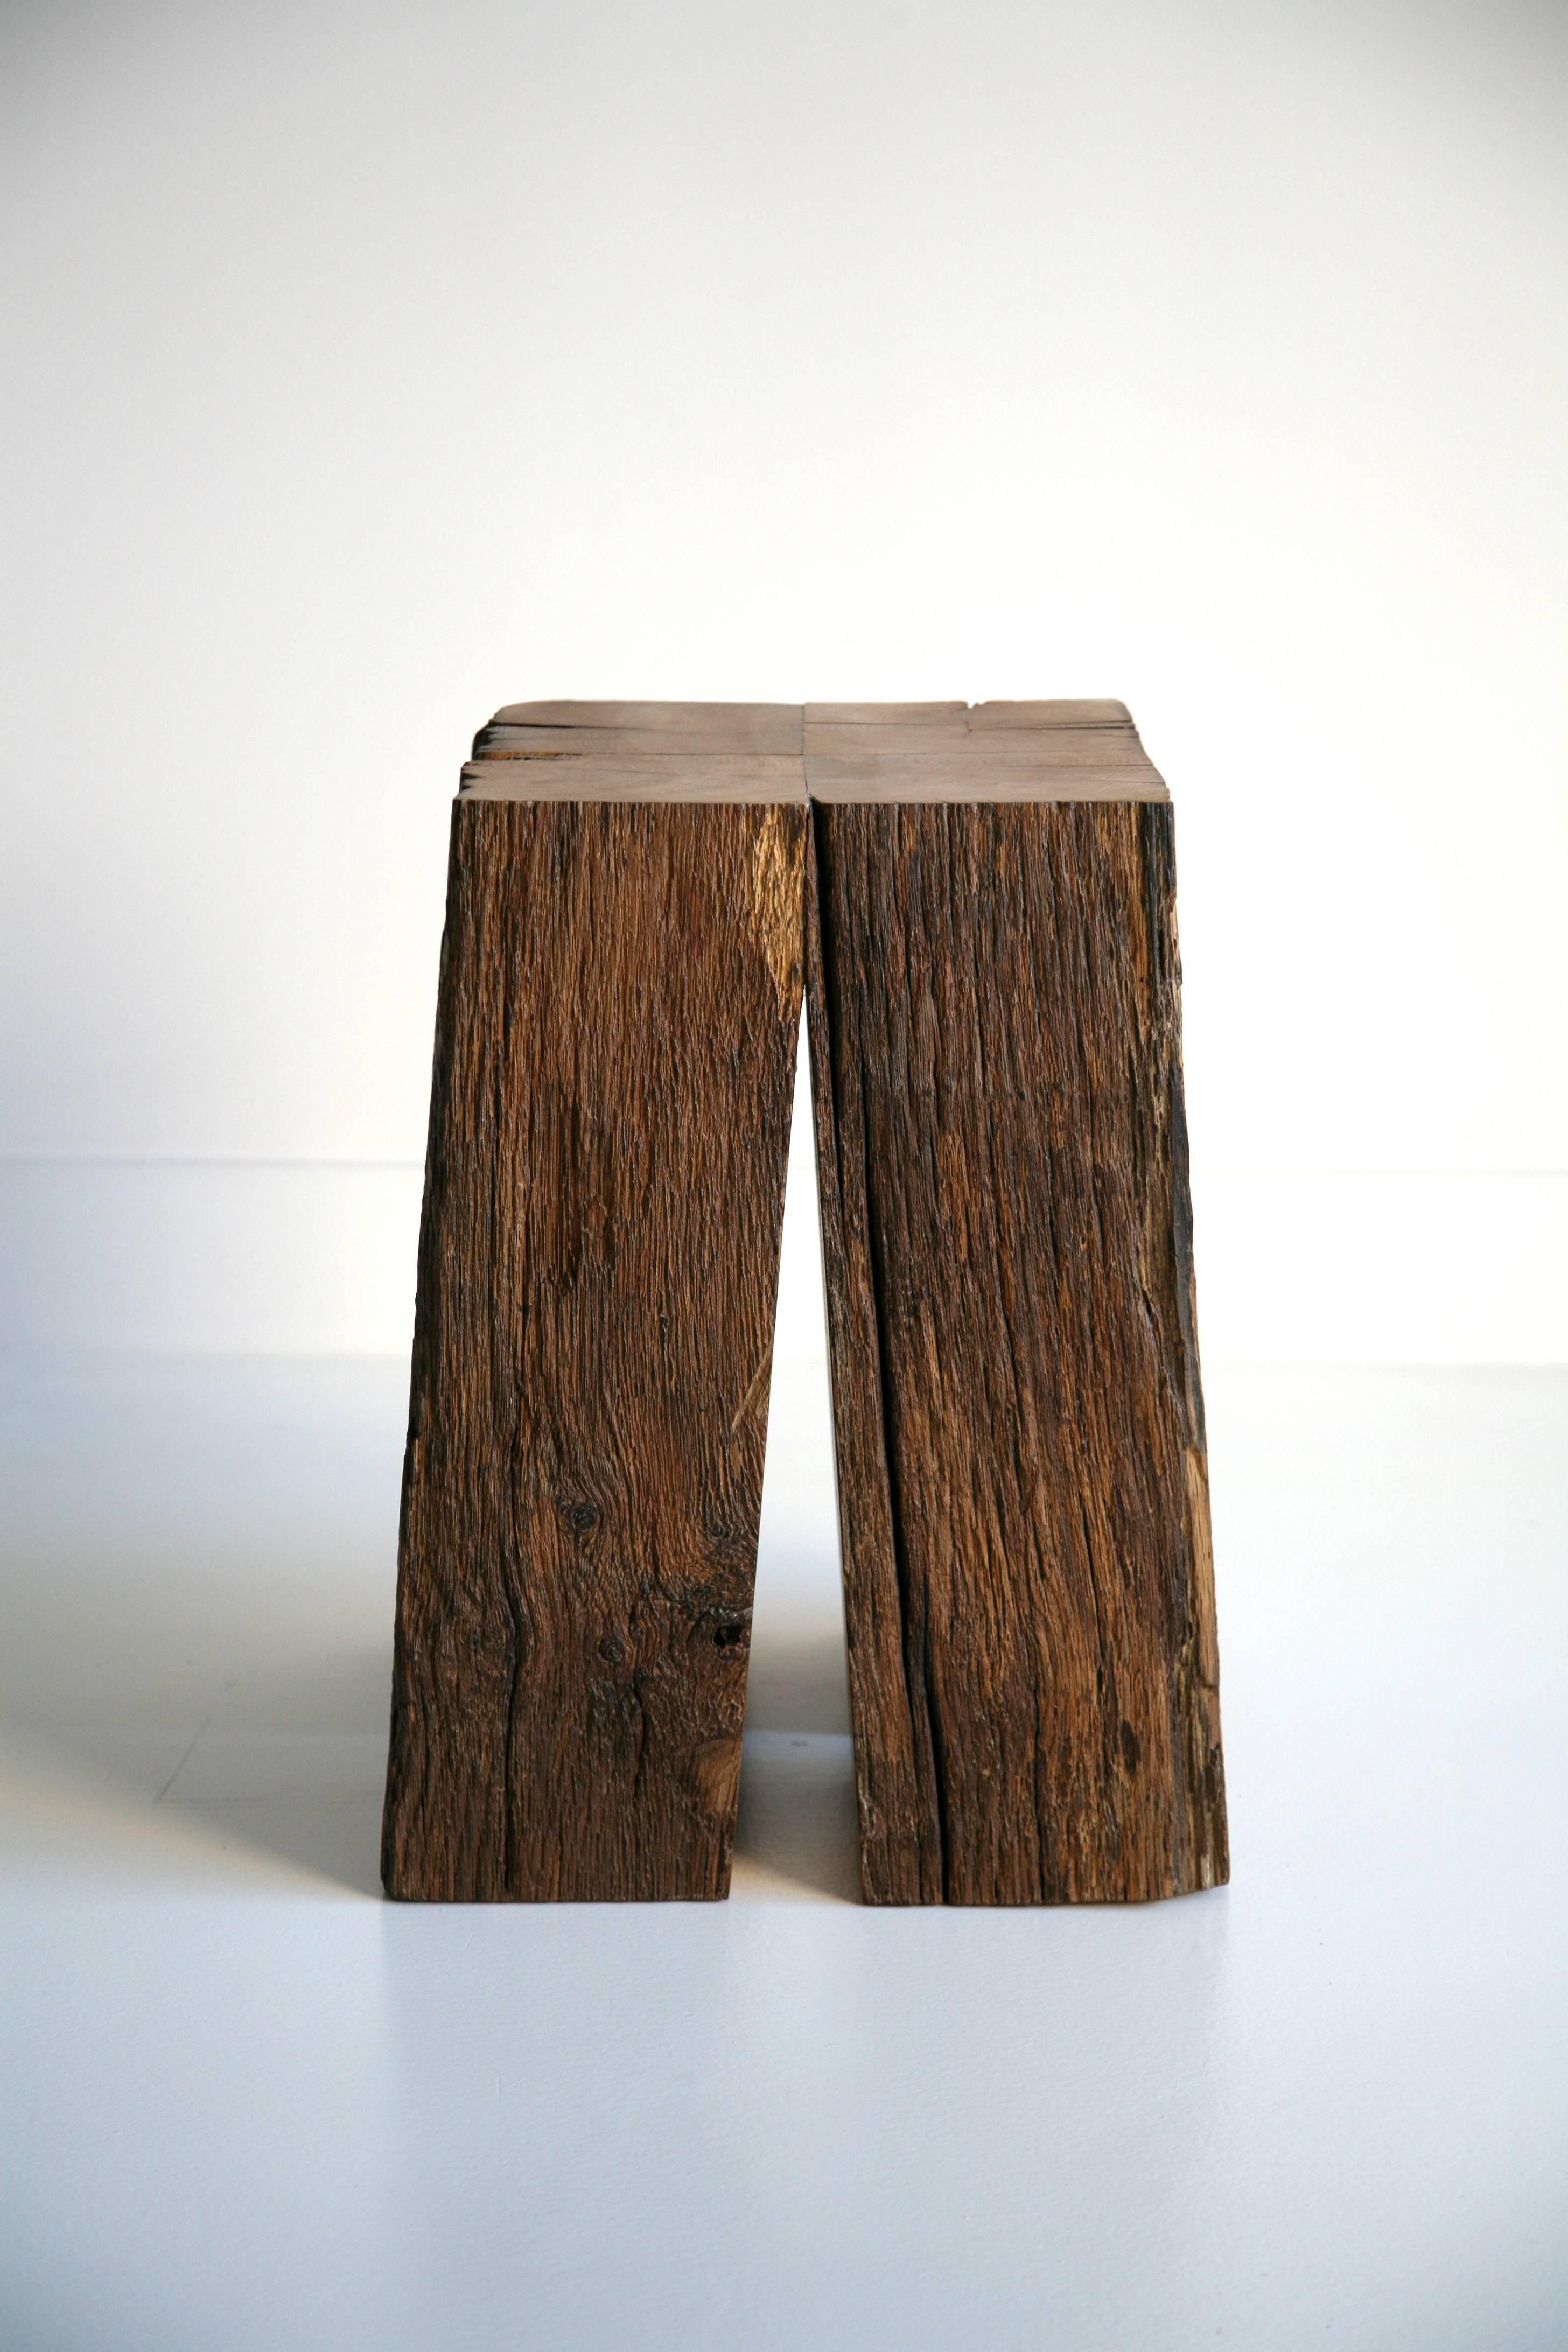 Organic Modern Ensemble of Ancient Normandy Oak New Designed Stool Tables by Timothée Musset 